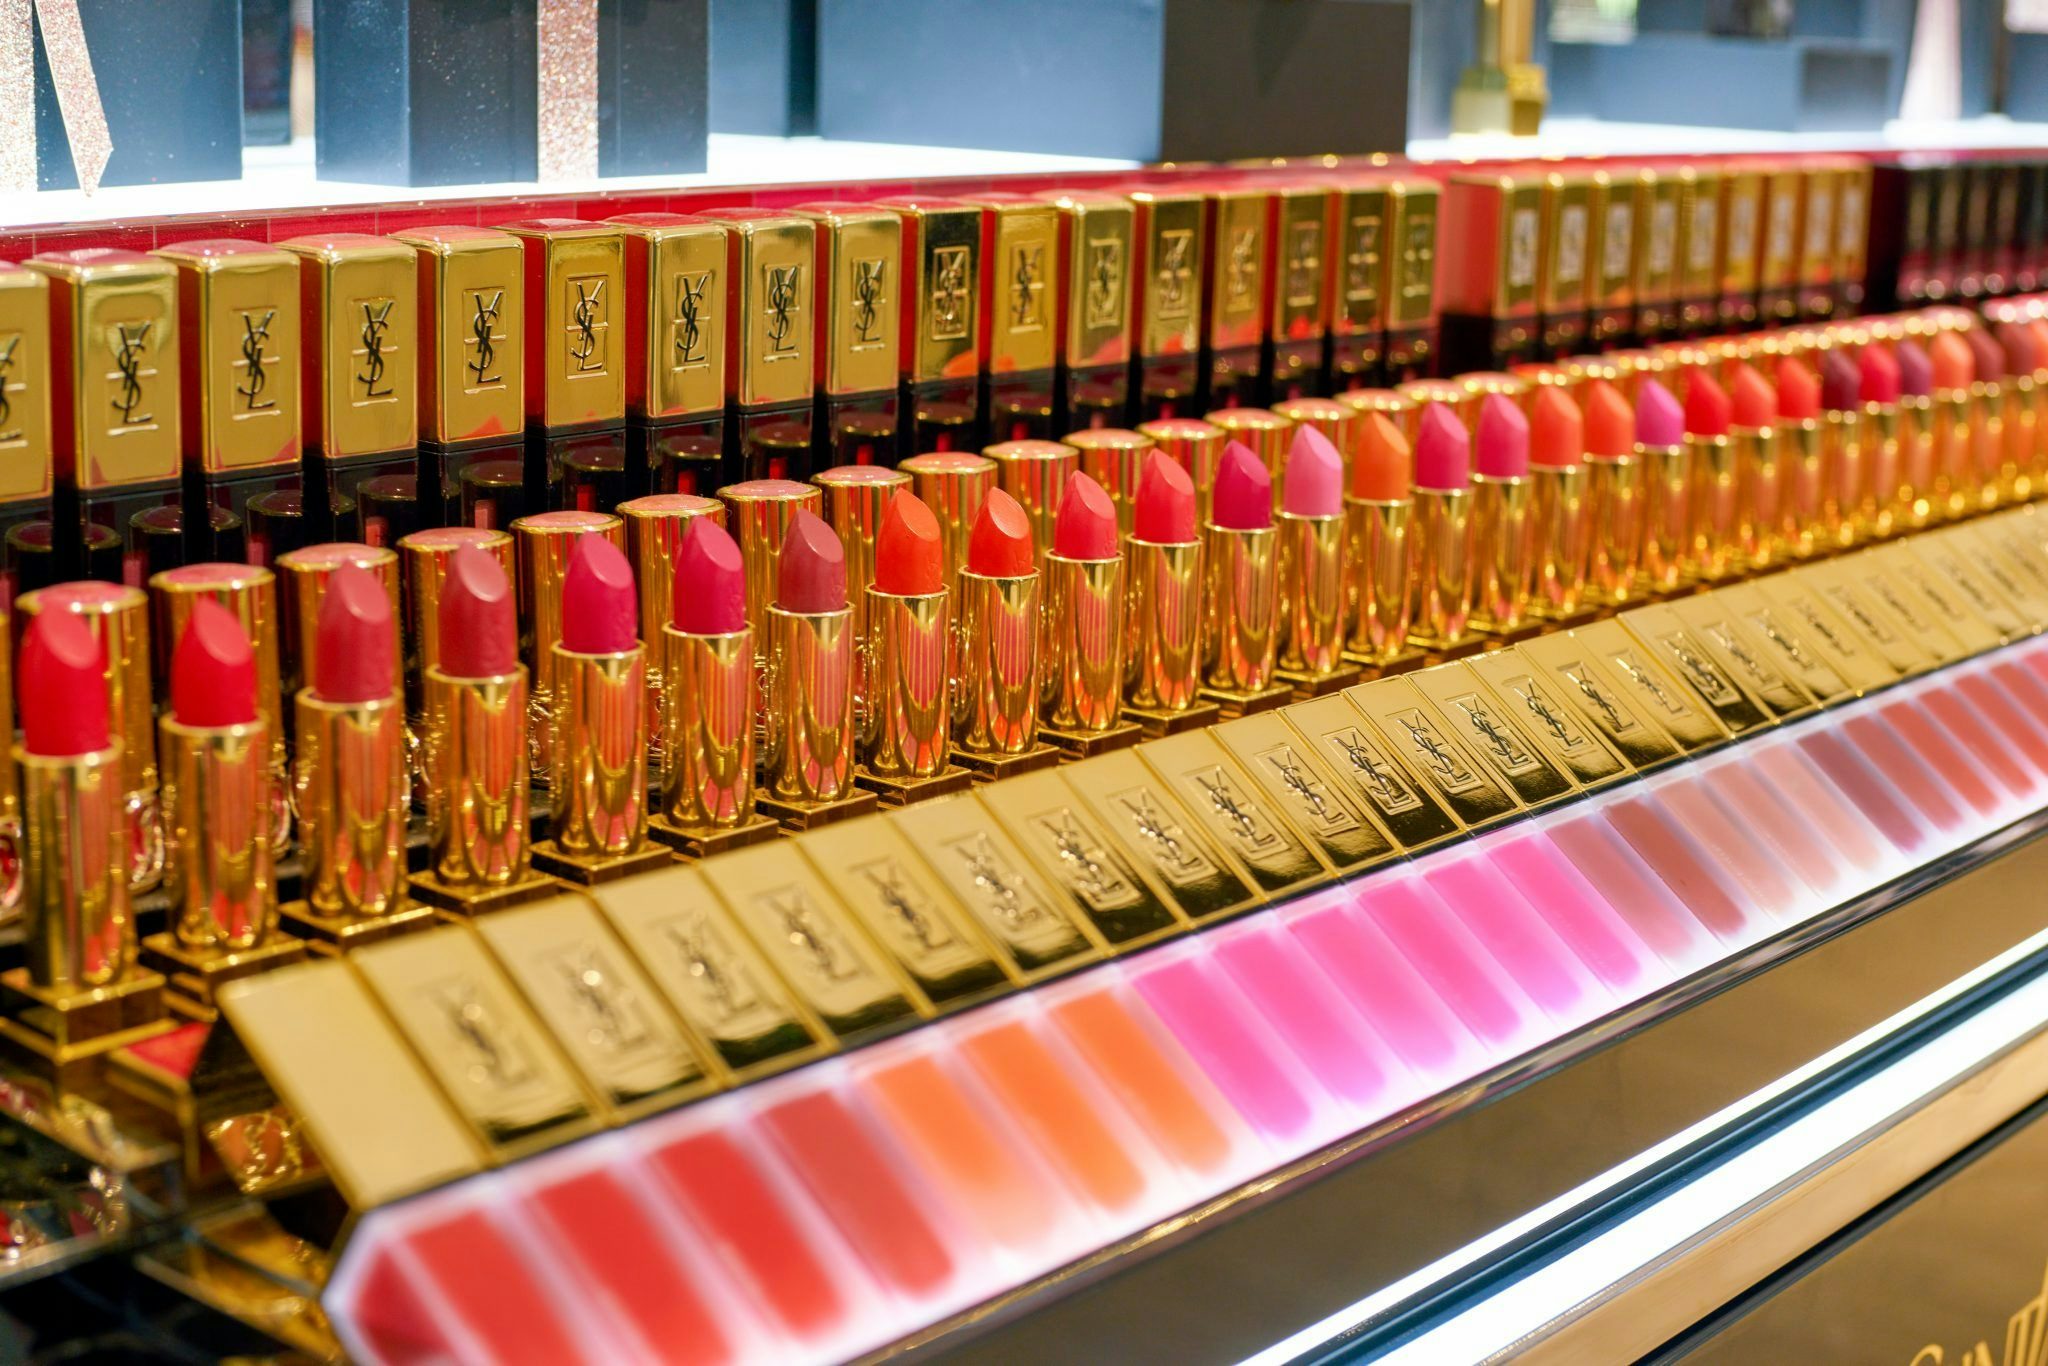 Yves Saint Laurent Beauté Pops up at LAX, Targeting Chinese Tourists